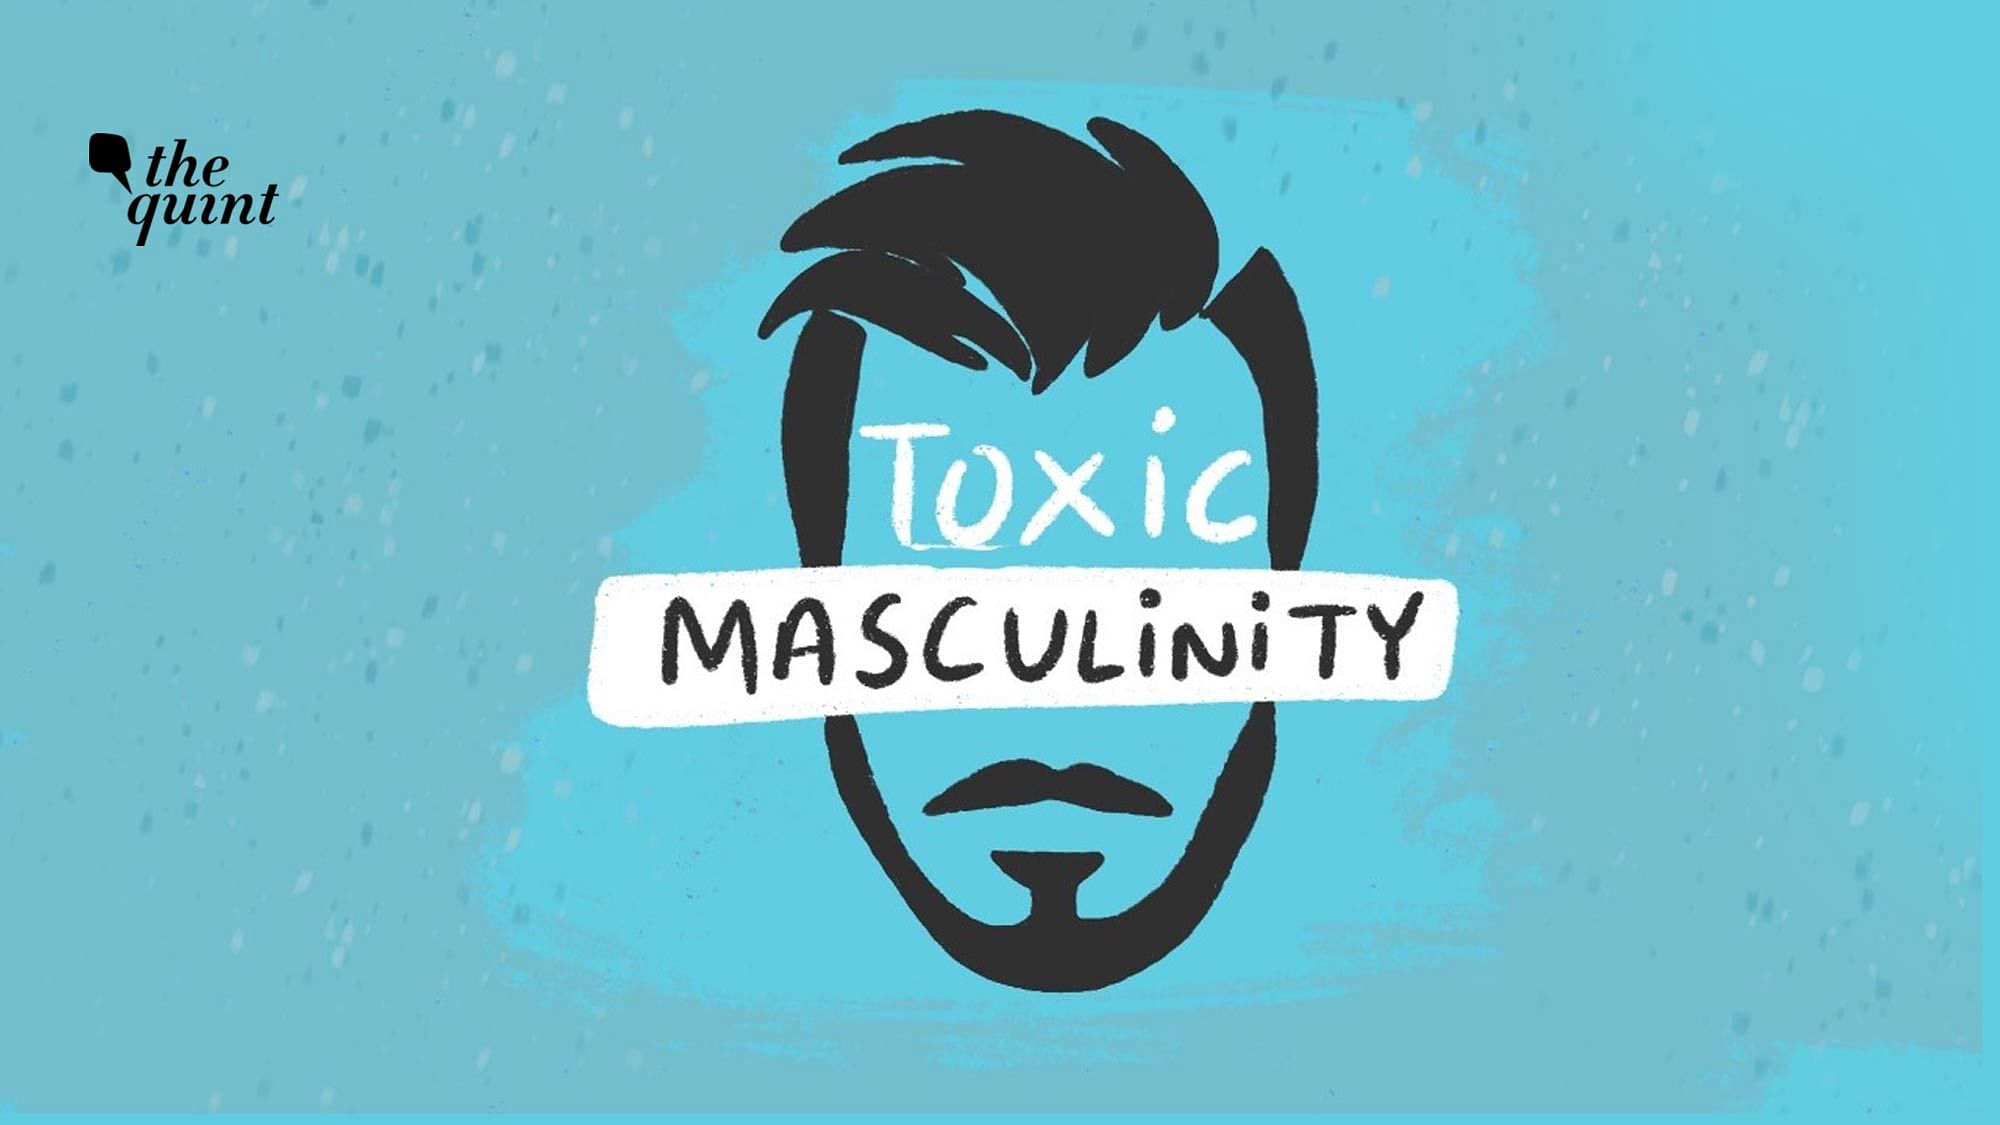 It’s important to understand how capitalism fuels toxic masculinity, writes Sagar Galani.  